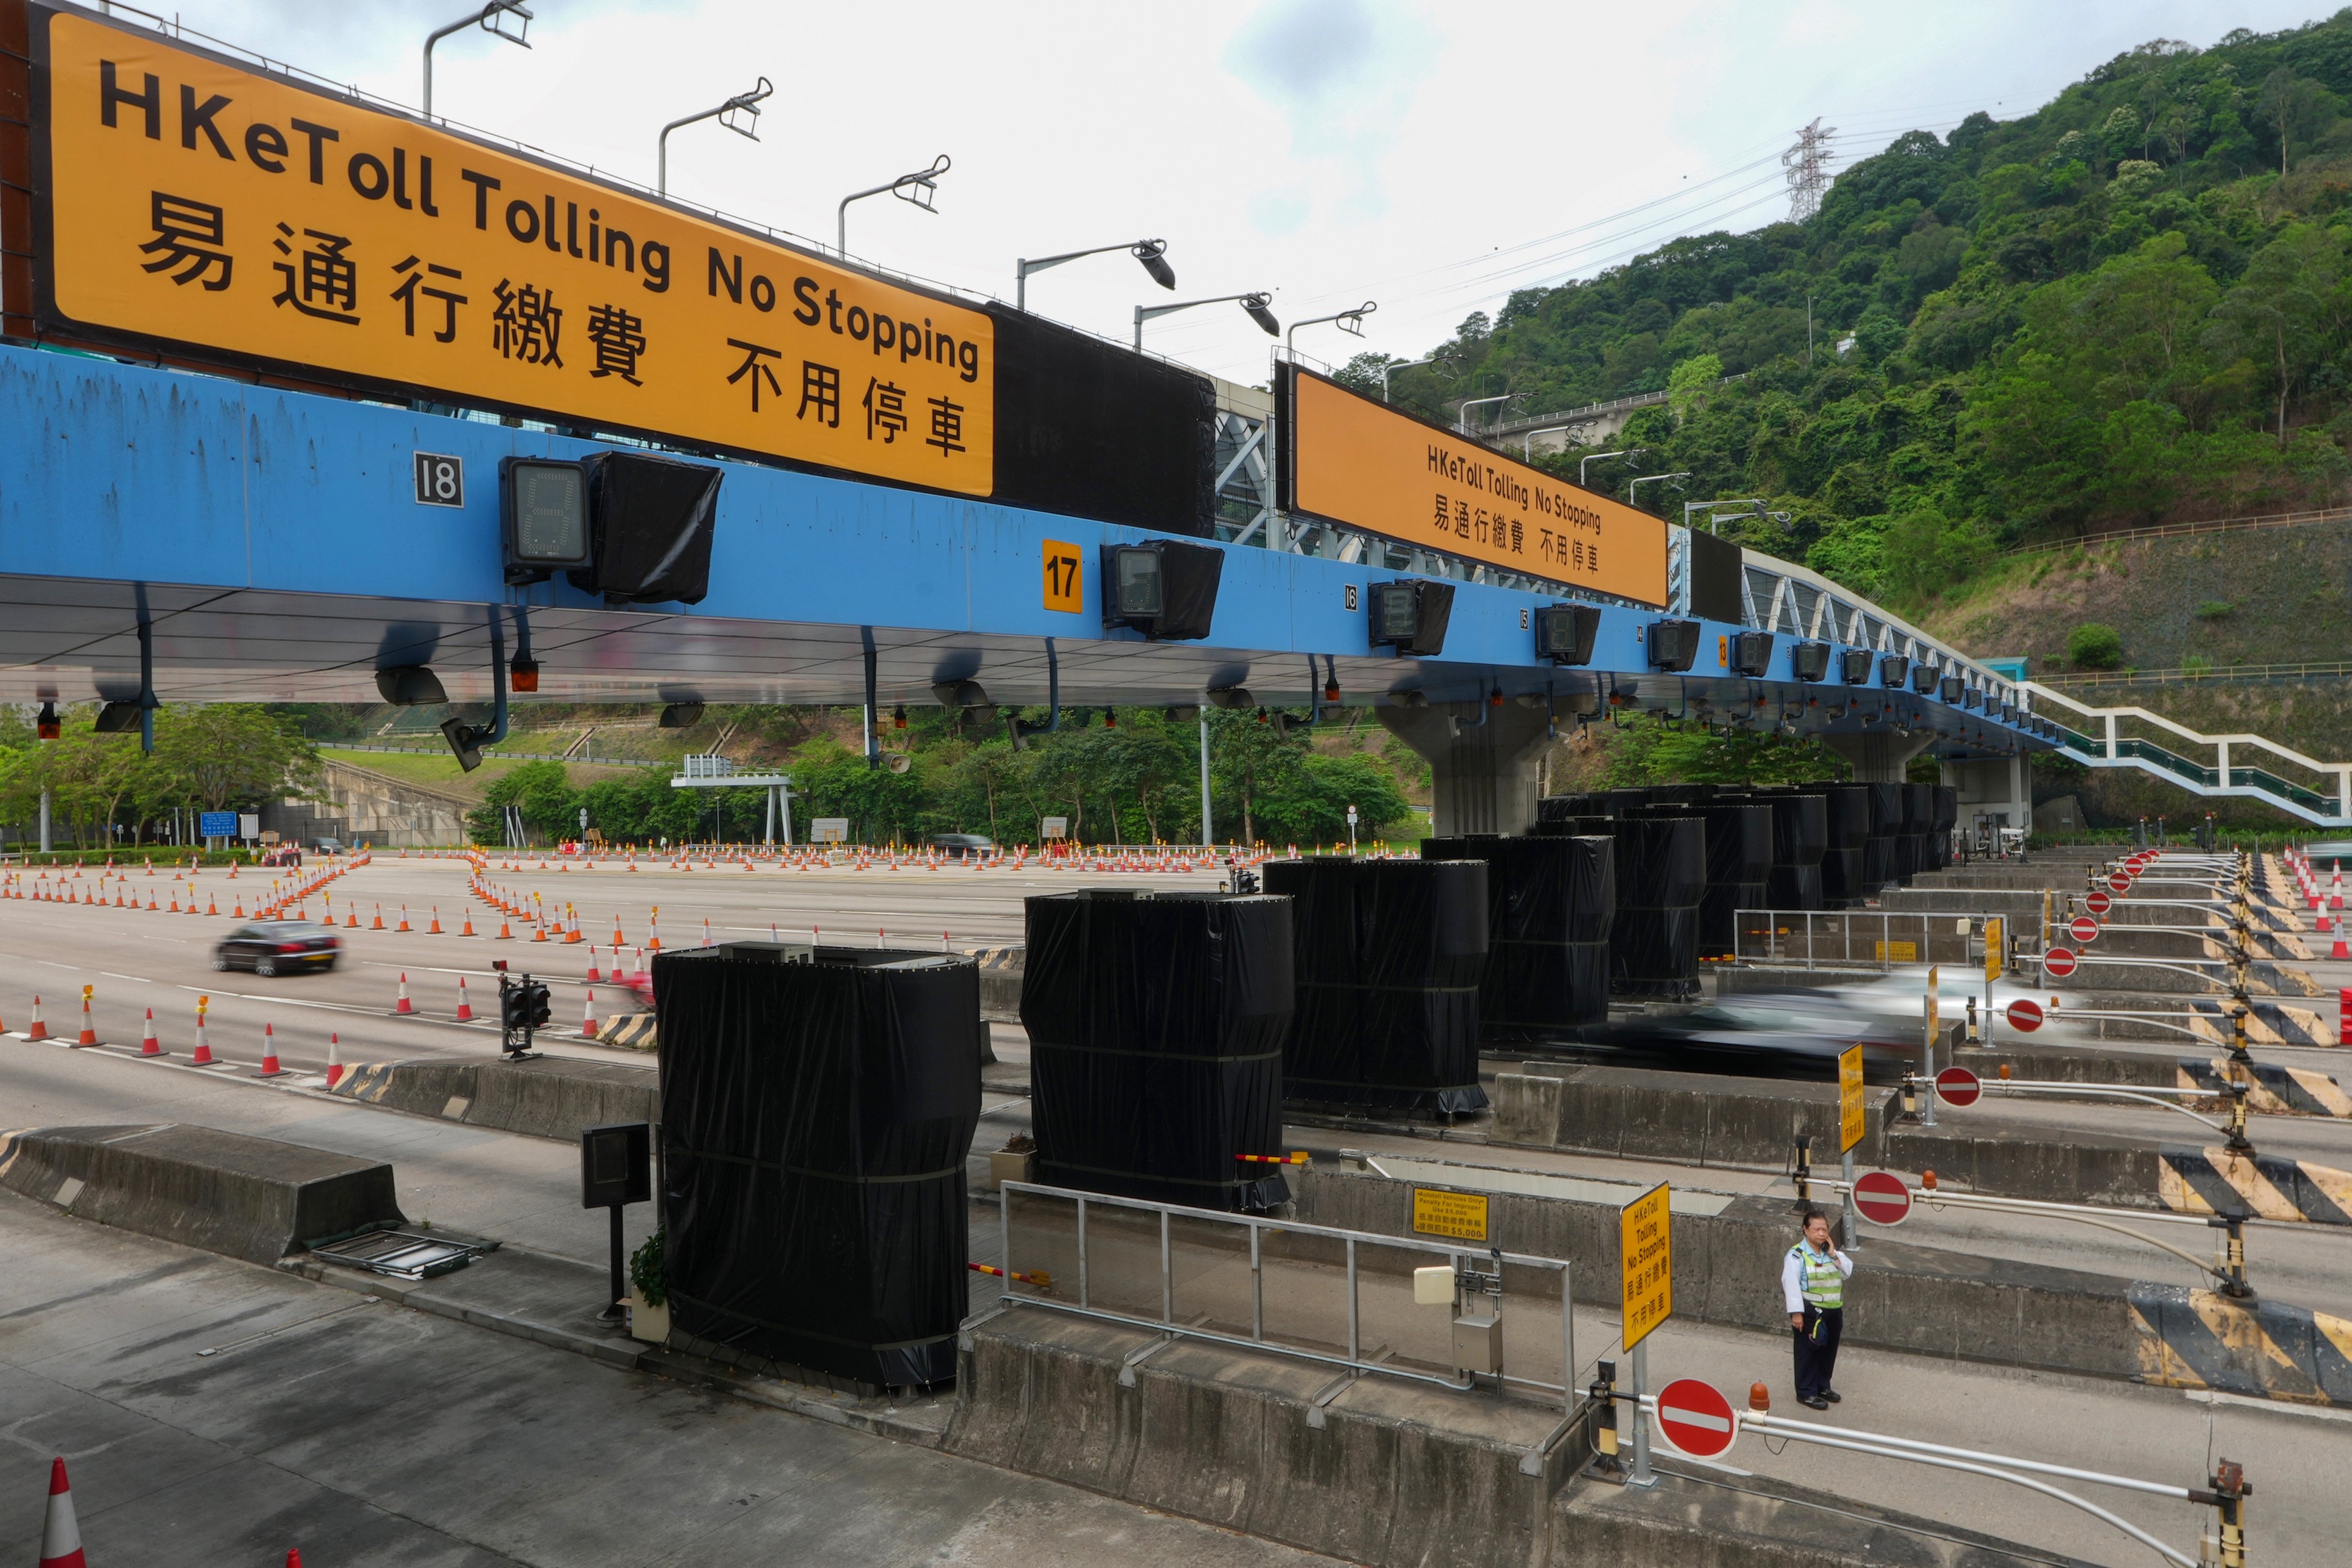 Toll booths at the Tsing Sha Control Area draped in black cloth to alert motorists they are no longer in use.  Photo: Elson Li